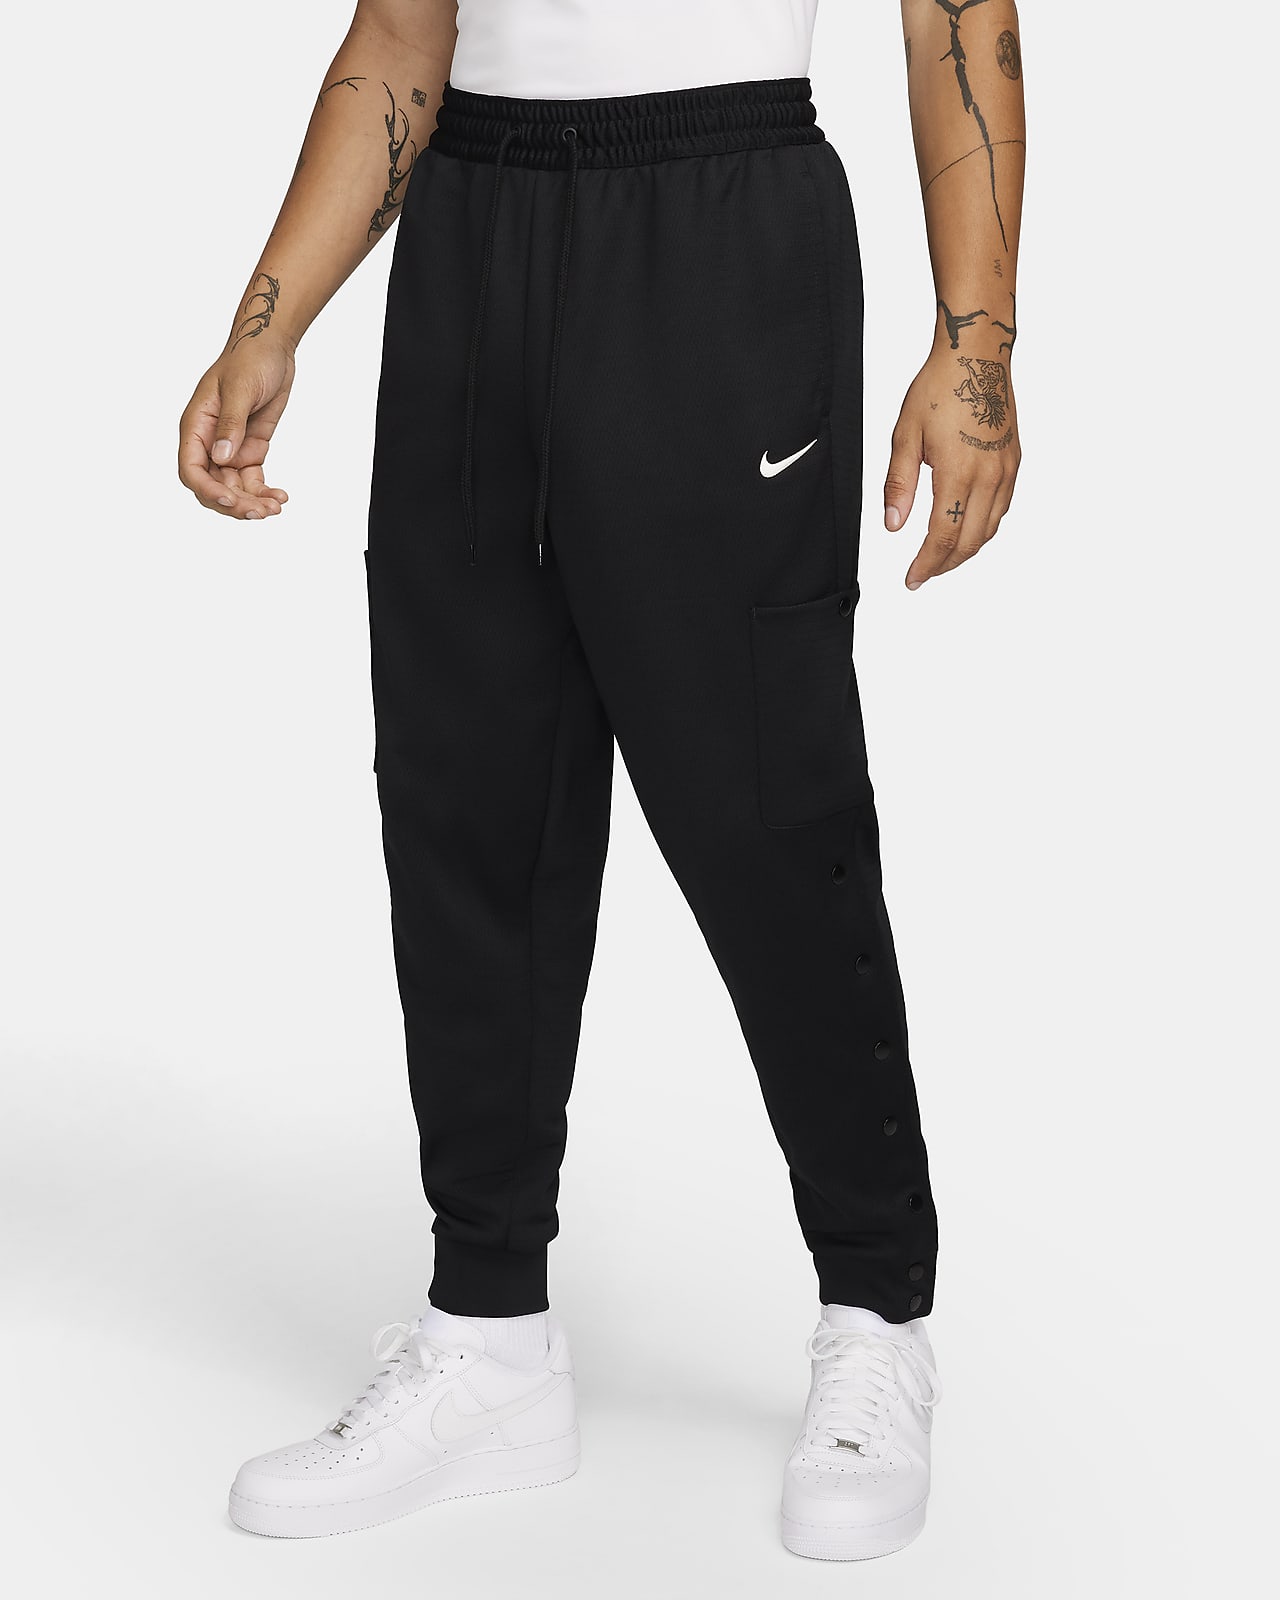 Nike Men's Therma-FIT Basketball Cargo Pants.